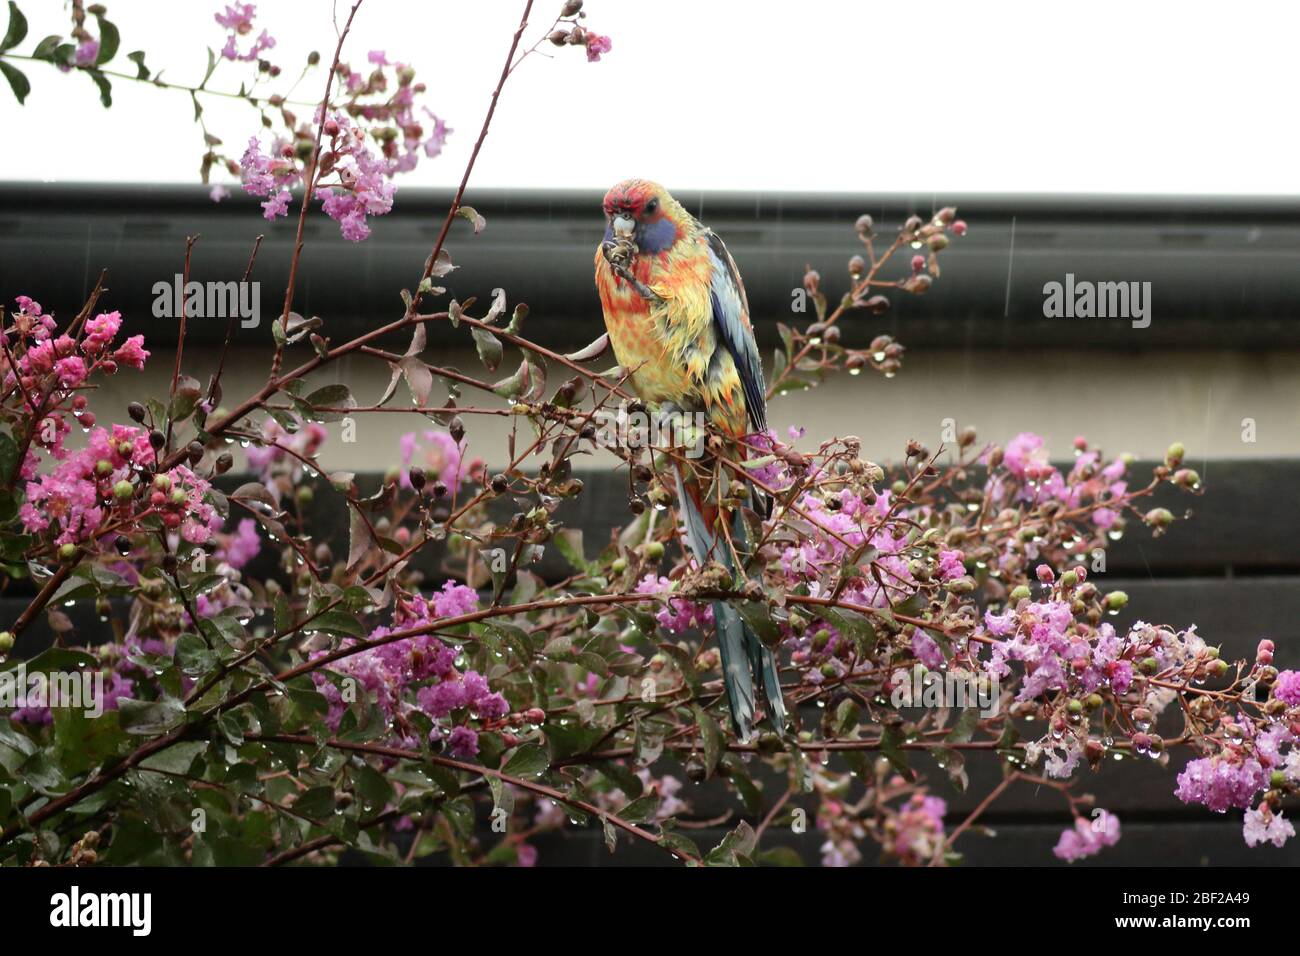 Eastern green Rosella eating Crepe myrtle flower pods in the rain. Stock Photo